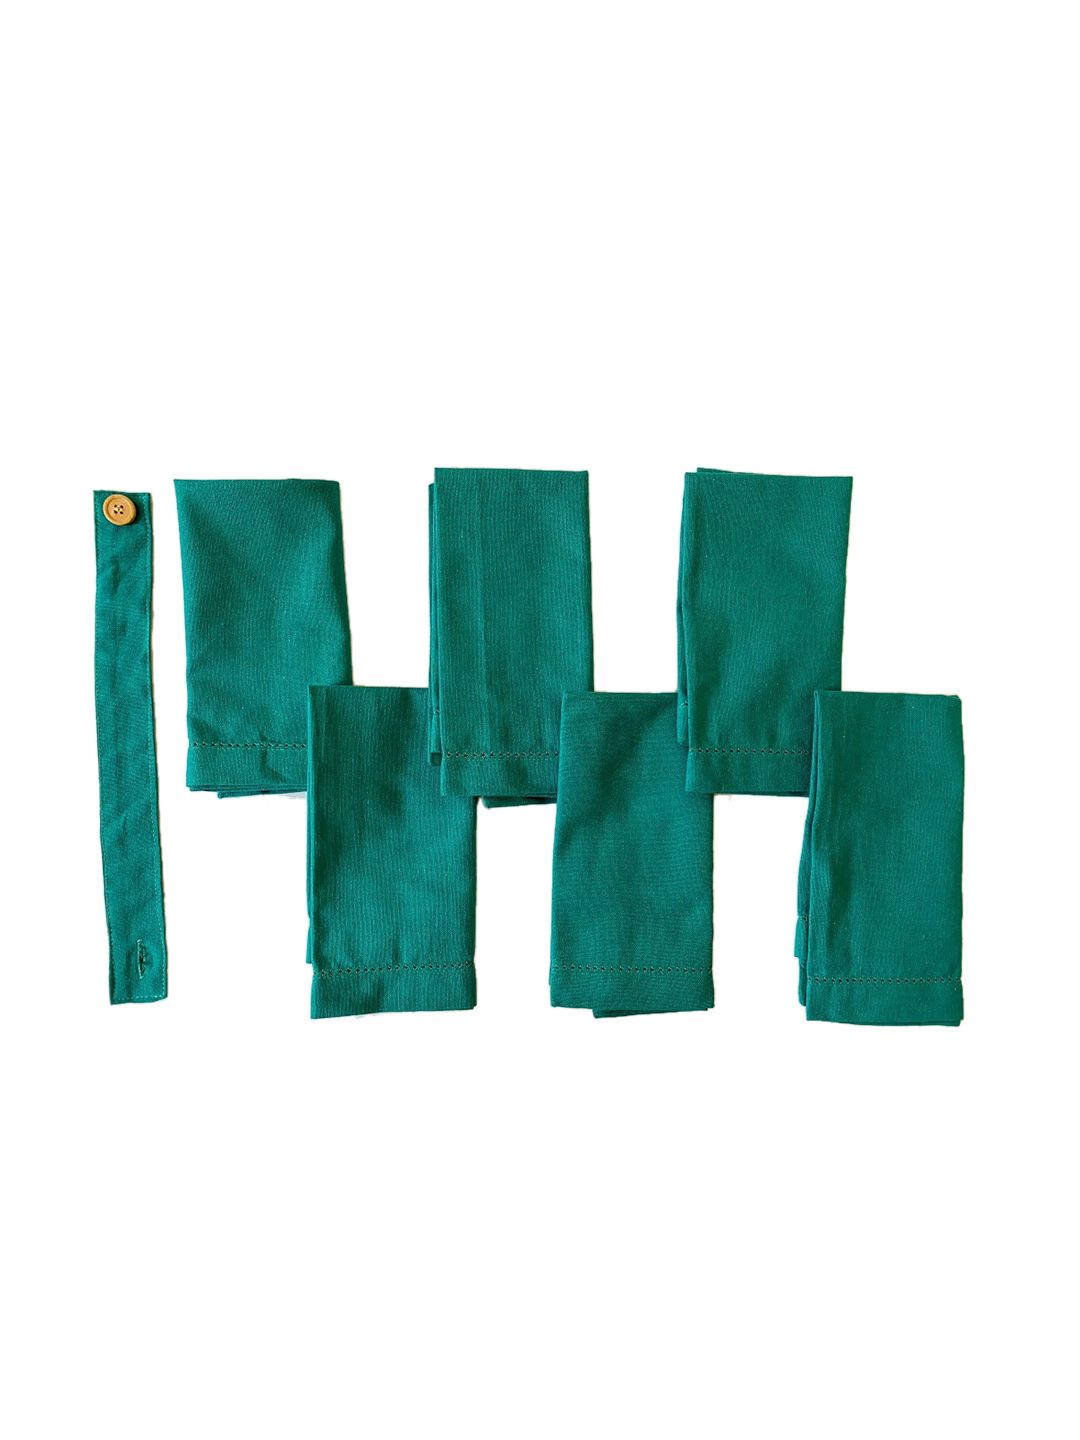 Lushomes Set Of 6 Green Solid Cotton Table Napkins Price in India